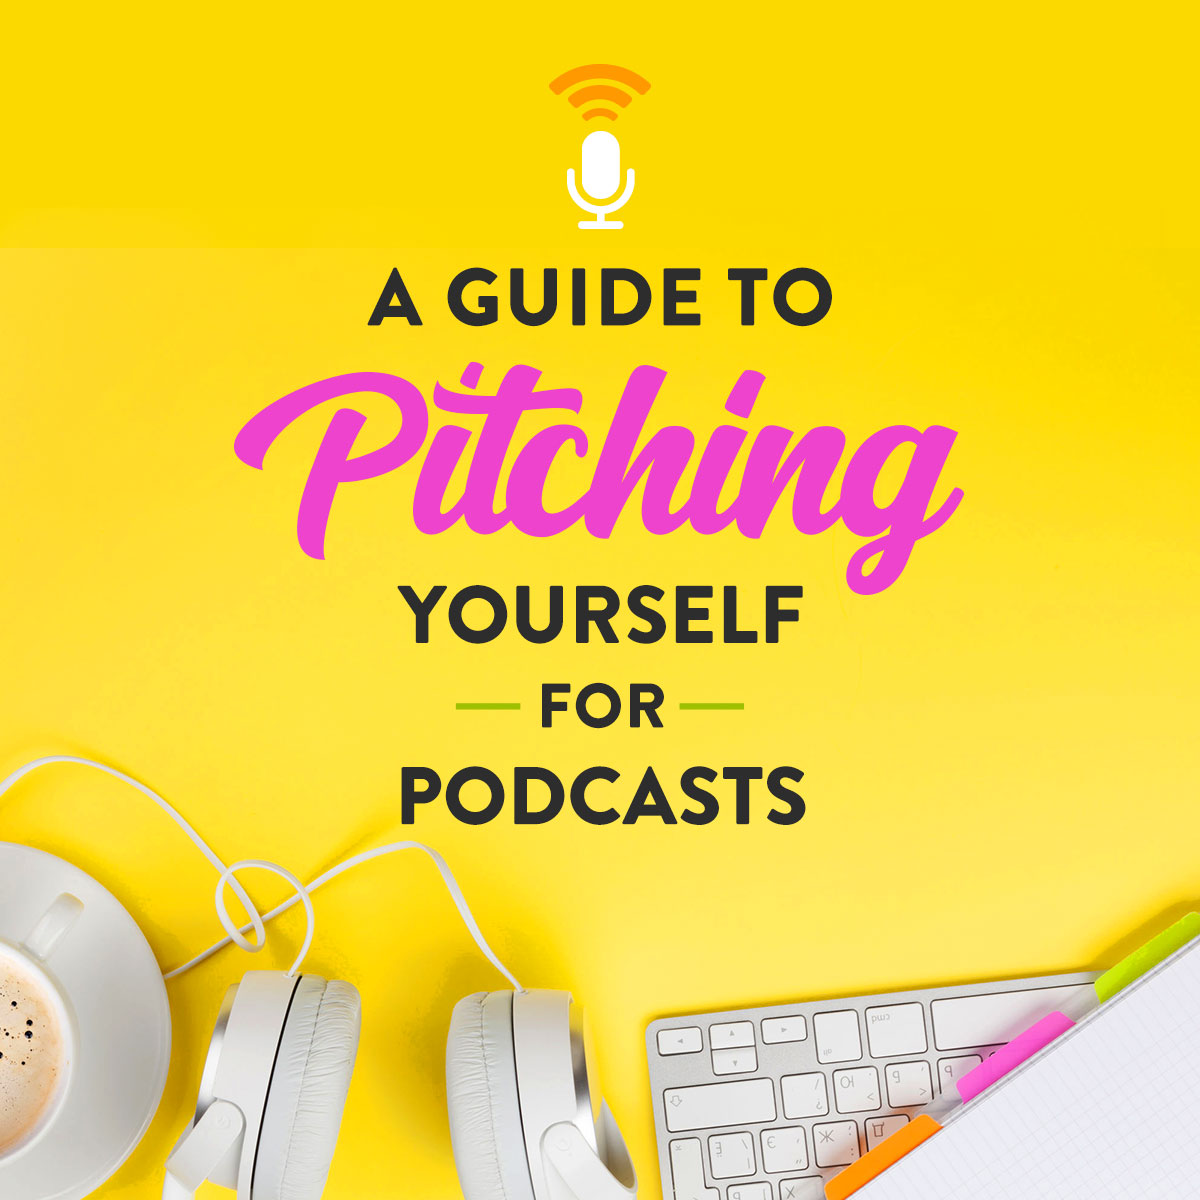 pitch-guide-square